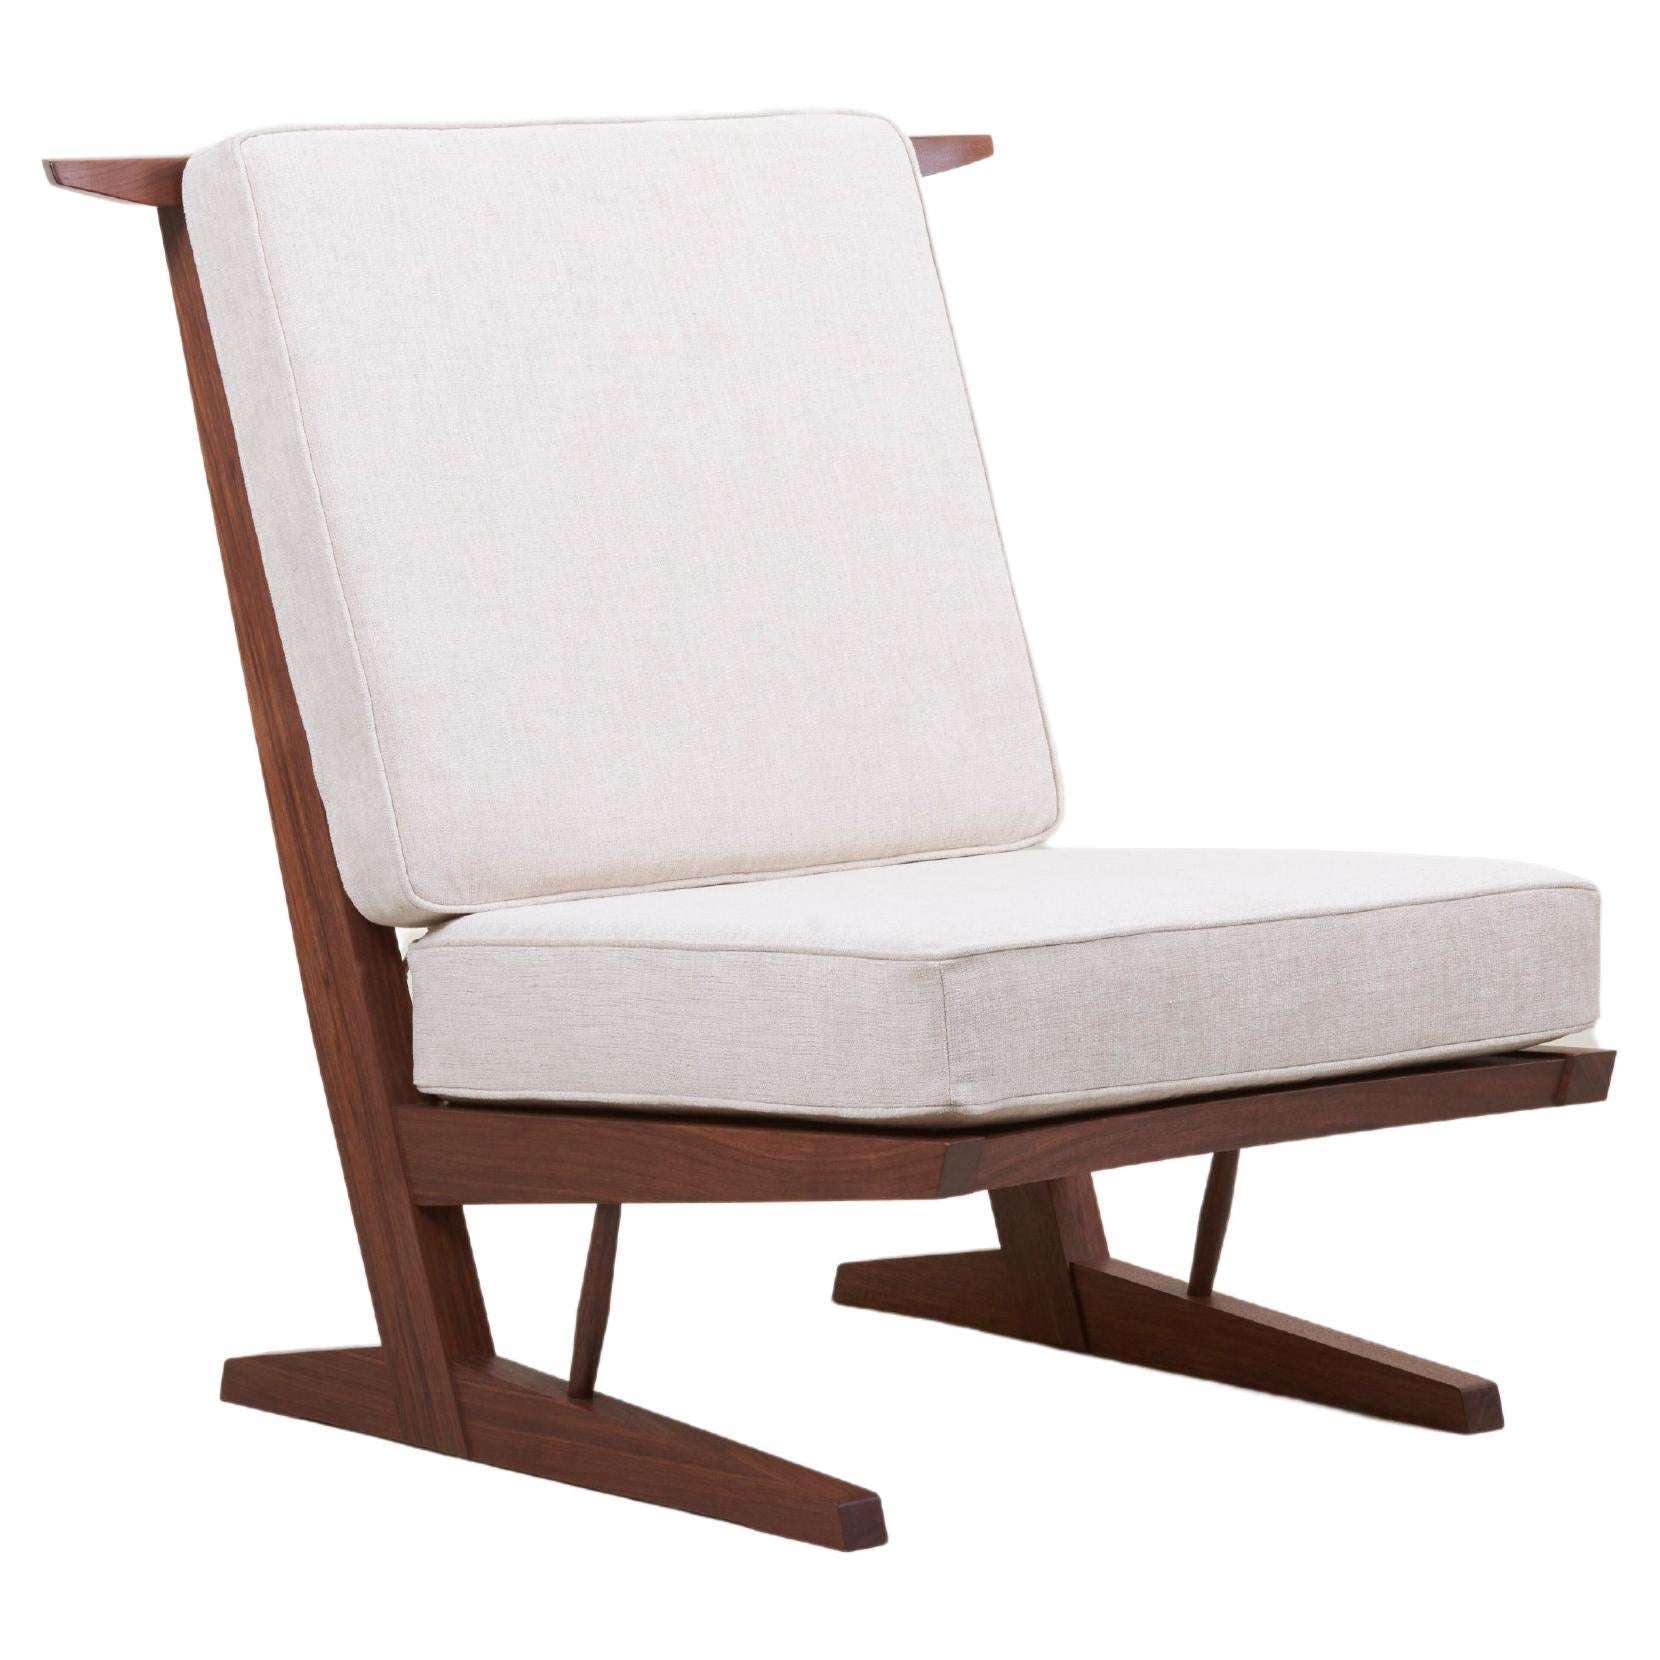 Conoid Lounge Chair by Mira Nakashima based on a design by George Nakashima